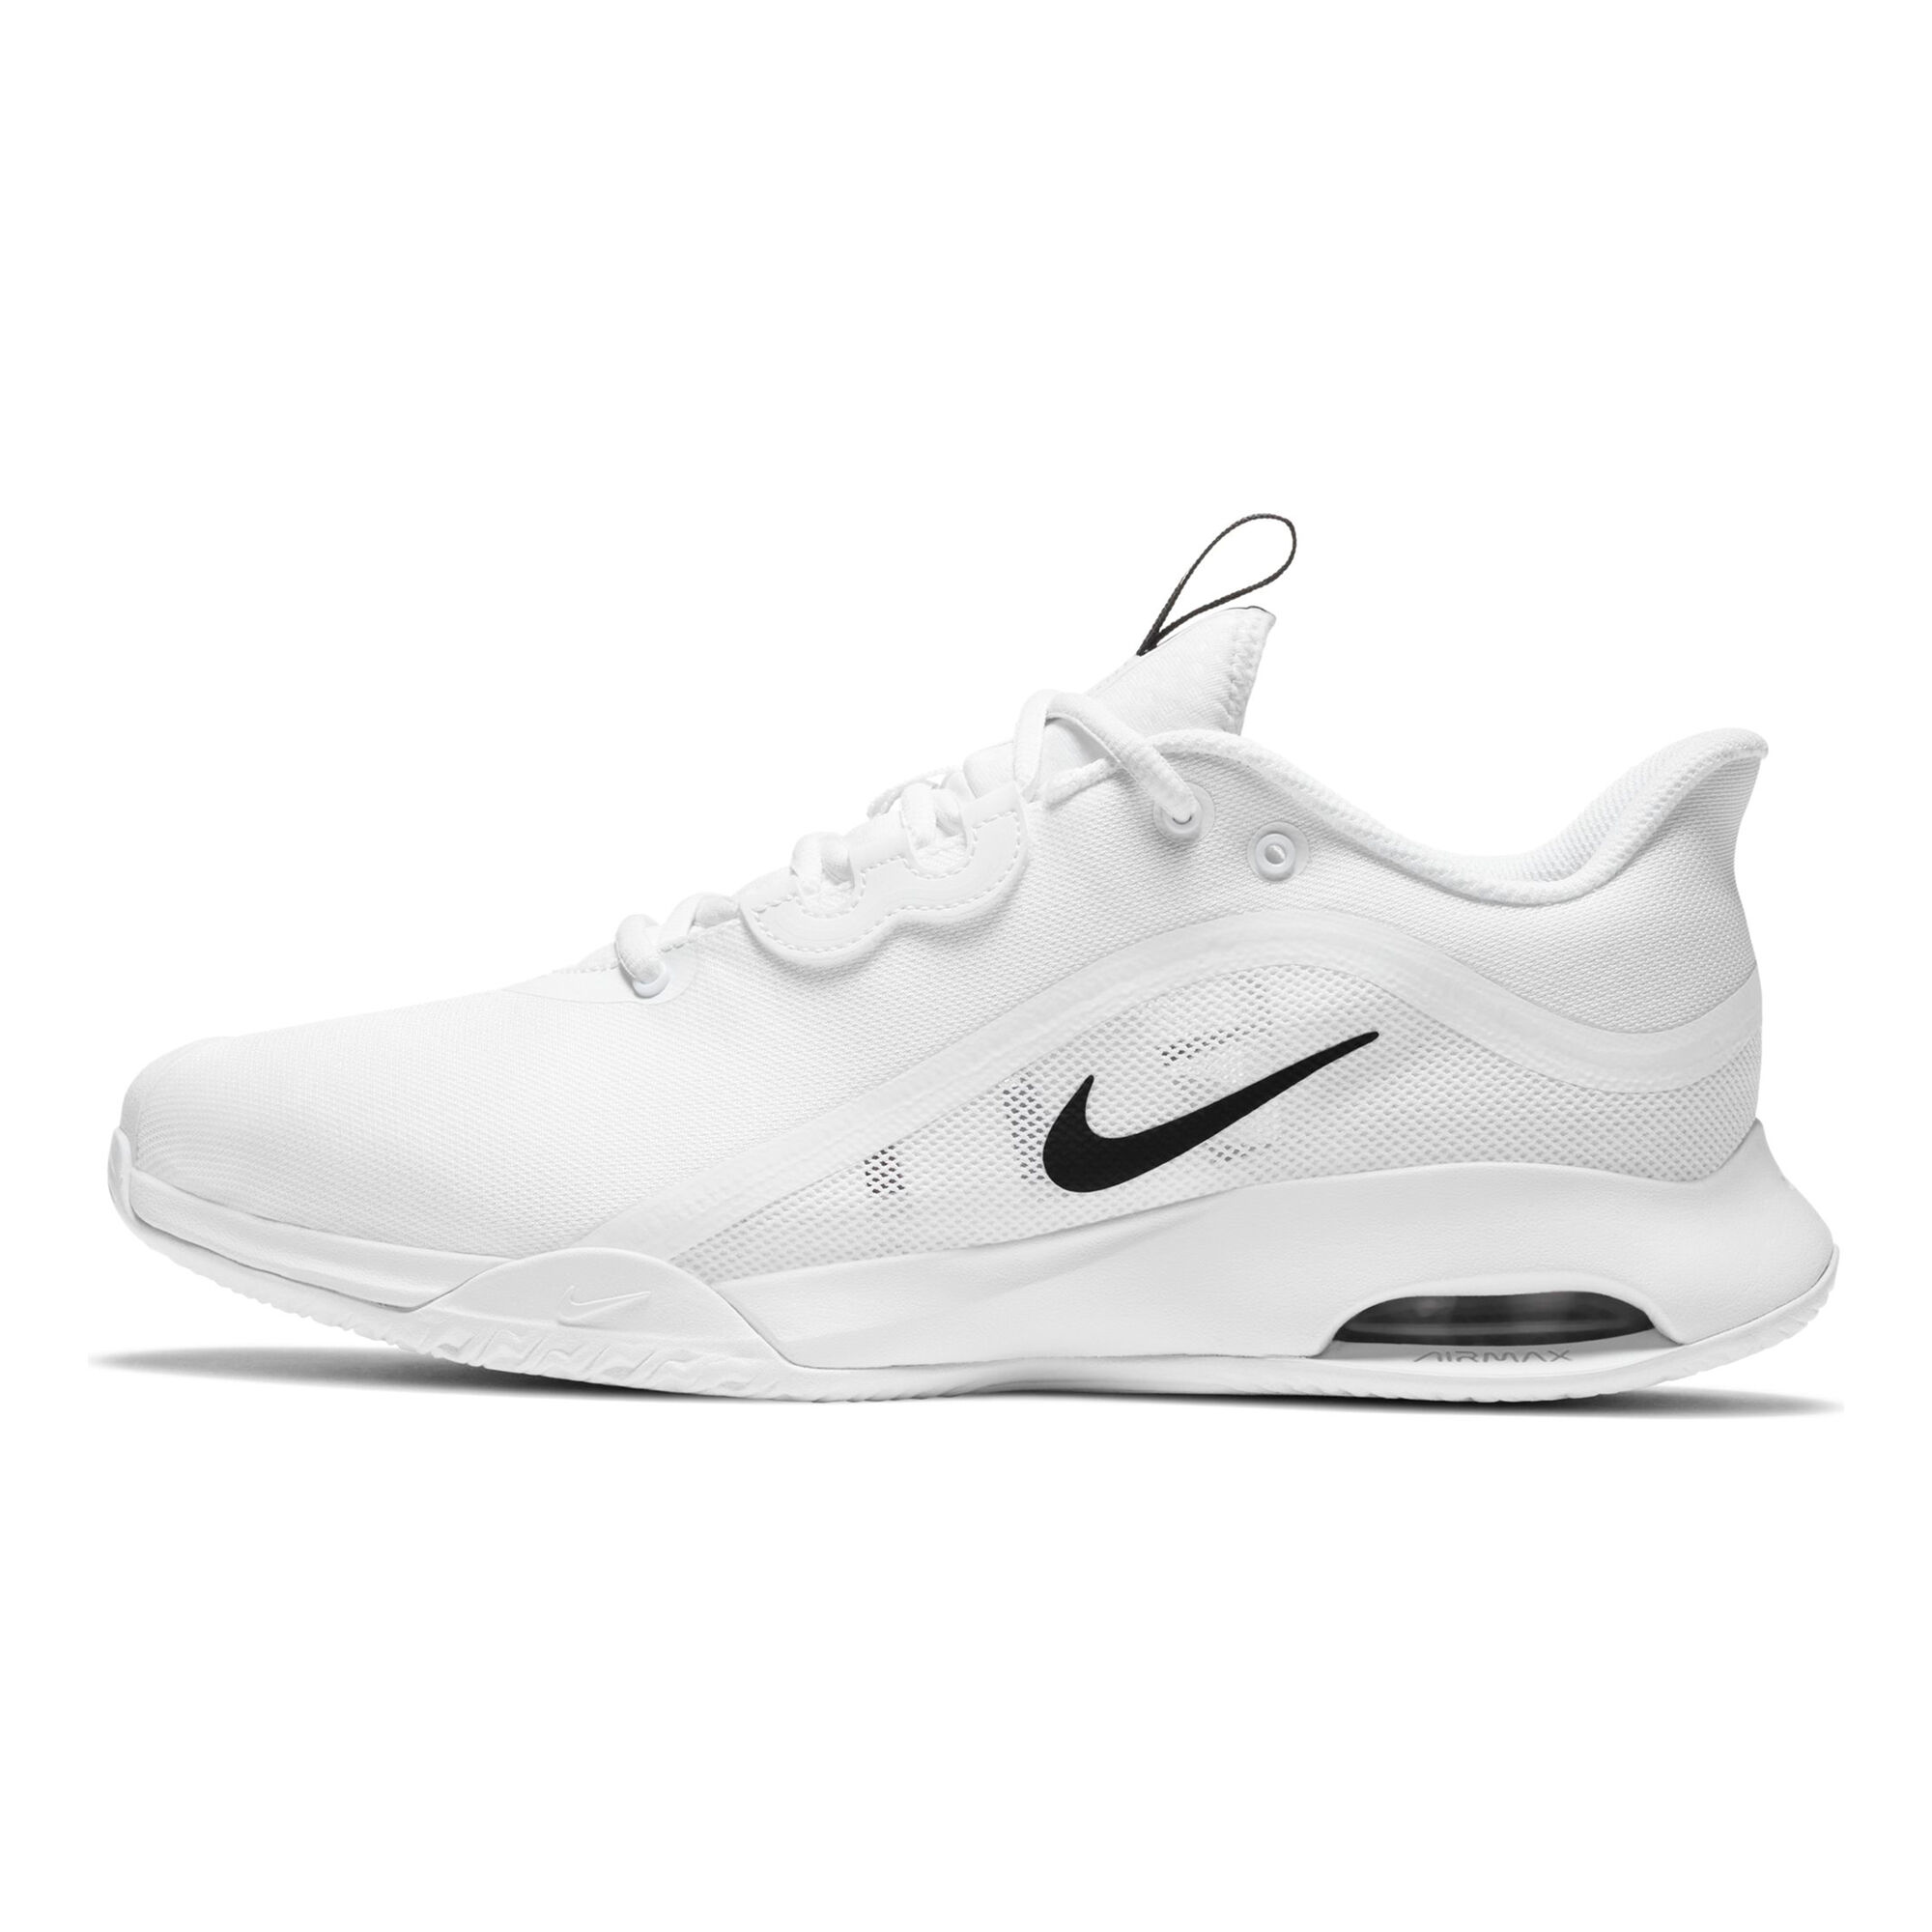 Buy Nike Air Max Volley All Court Shoe Men White, Black online | Tennis ...